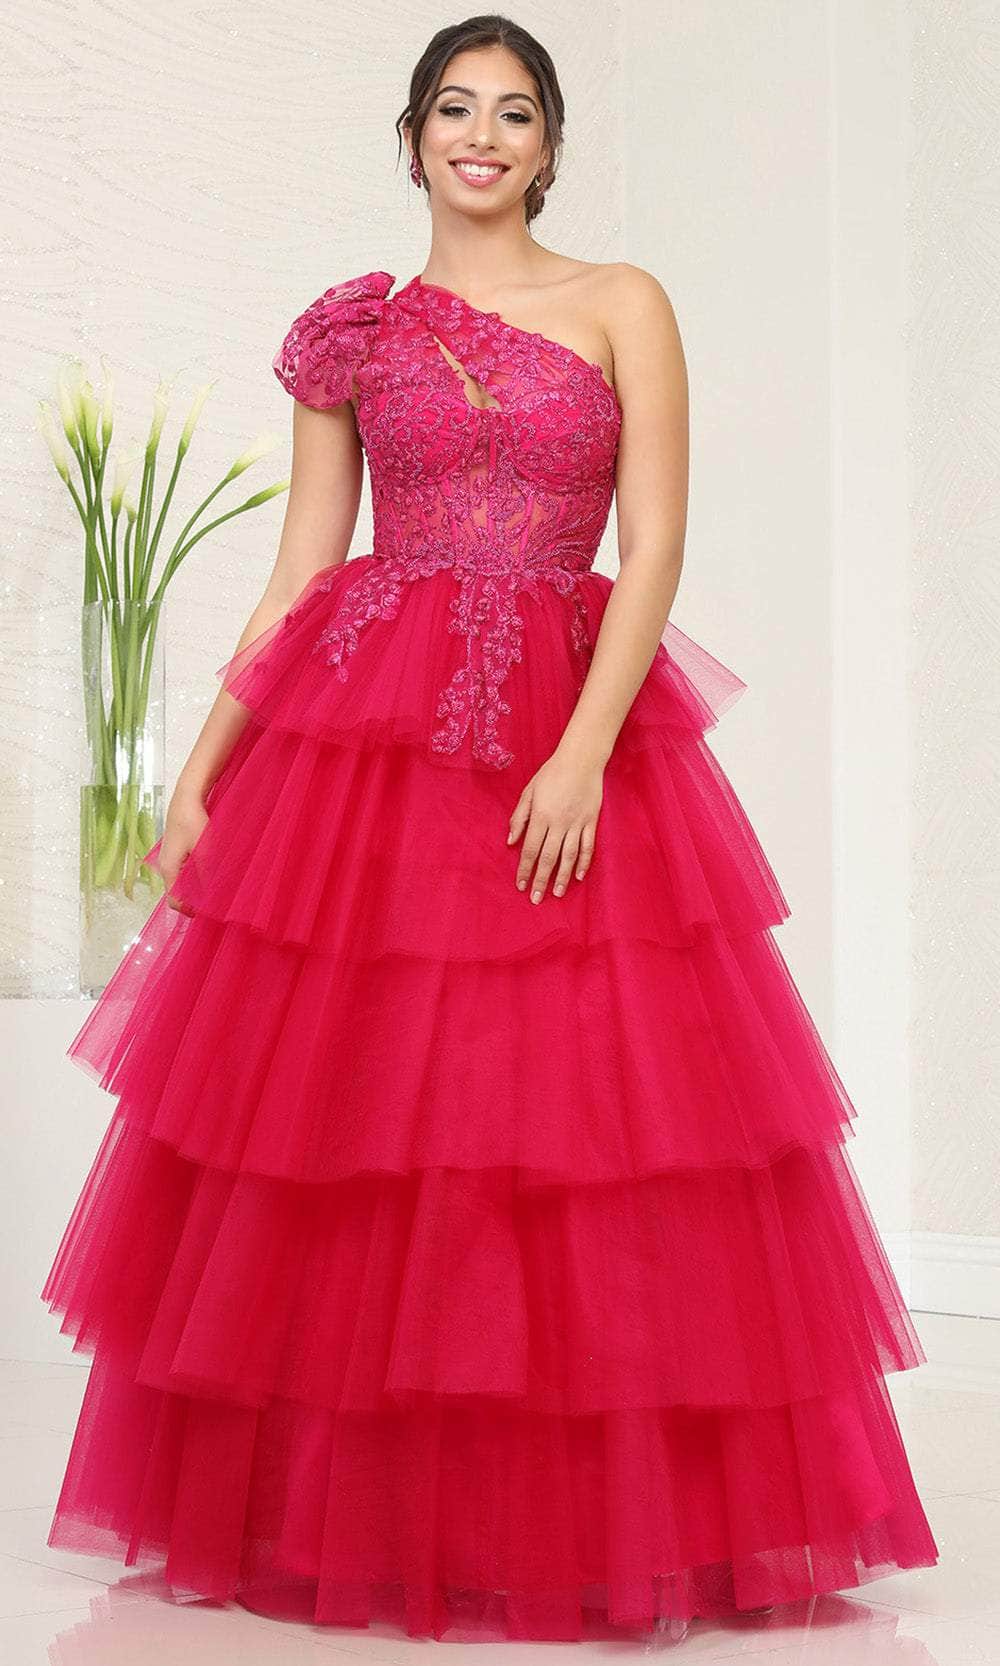 Image of May Queen RQ8119 - Asymmetric Beaded Appliqued Ballgown